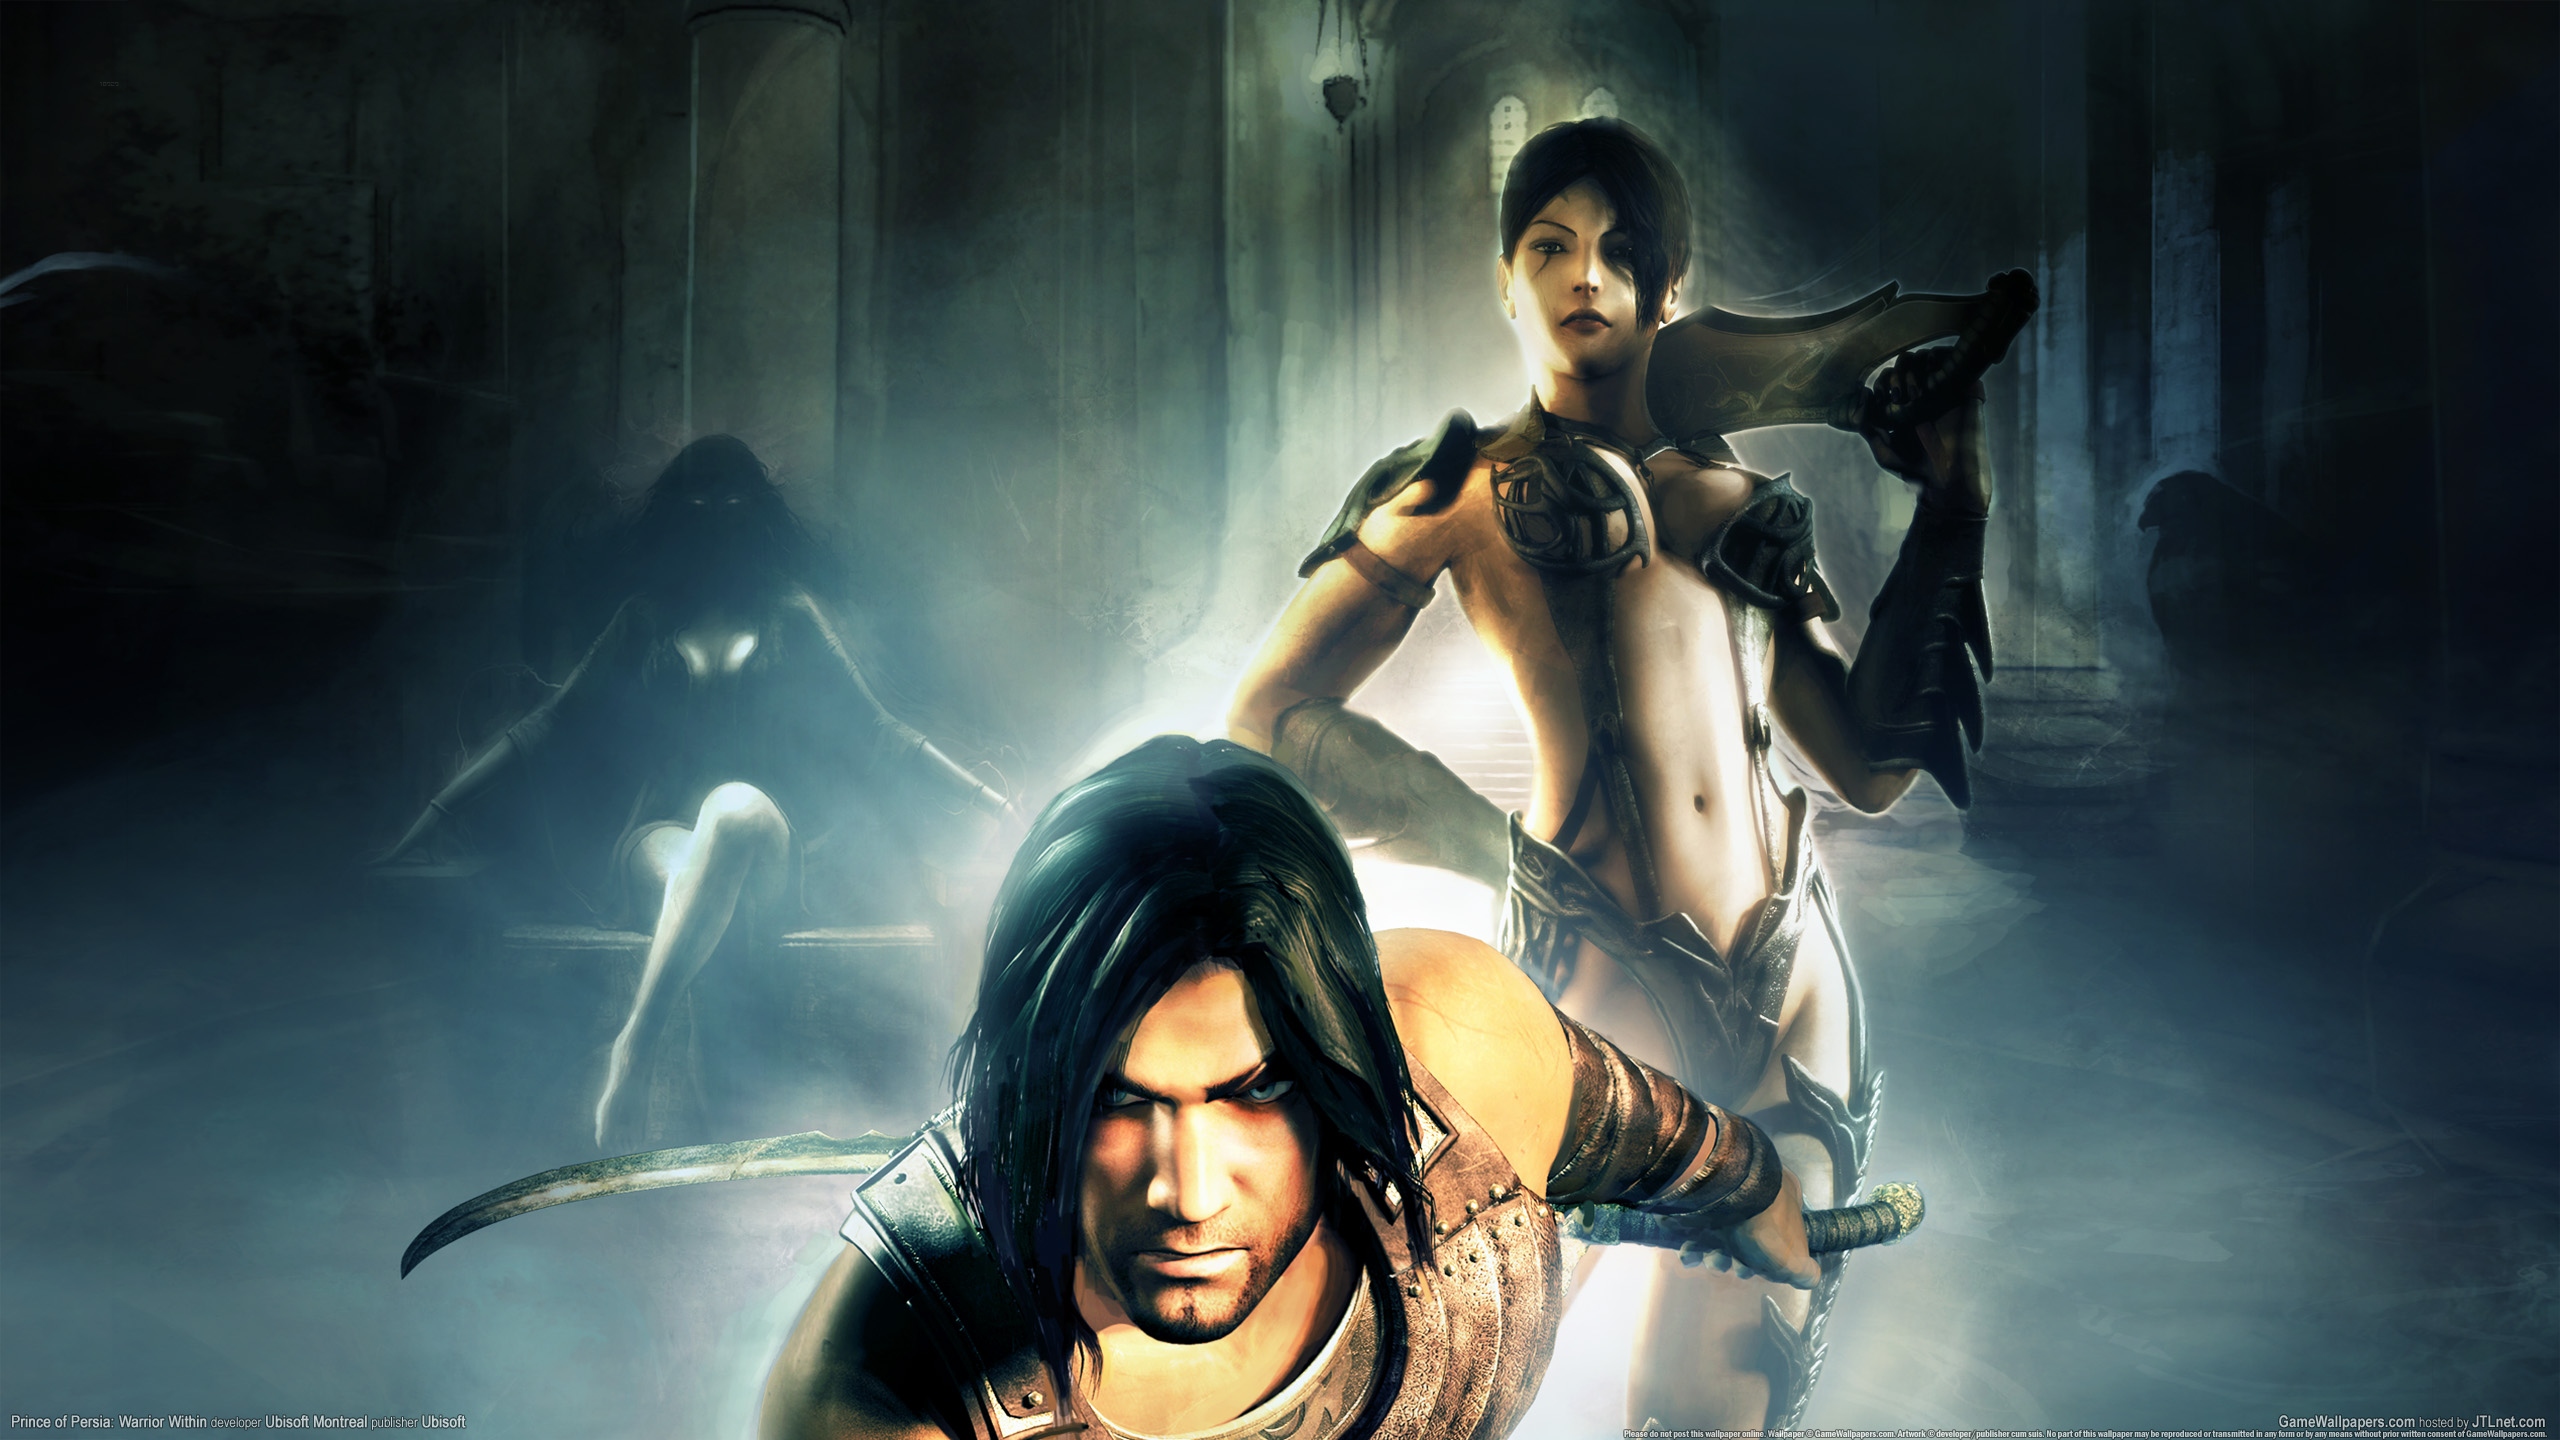 Prince of Persia: Warrior Within 2560x1440 fond d'cran 19